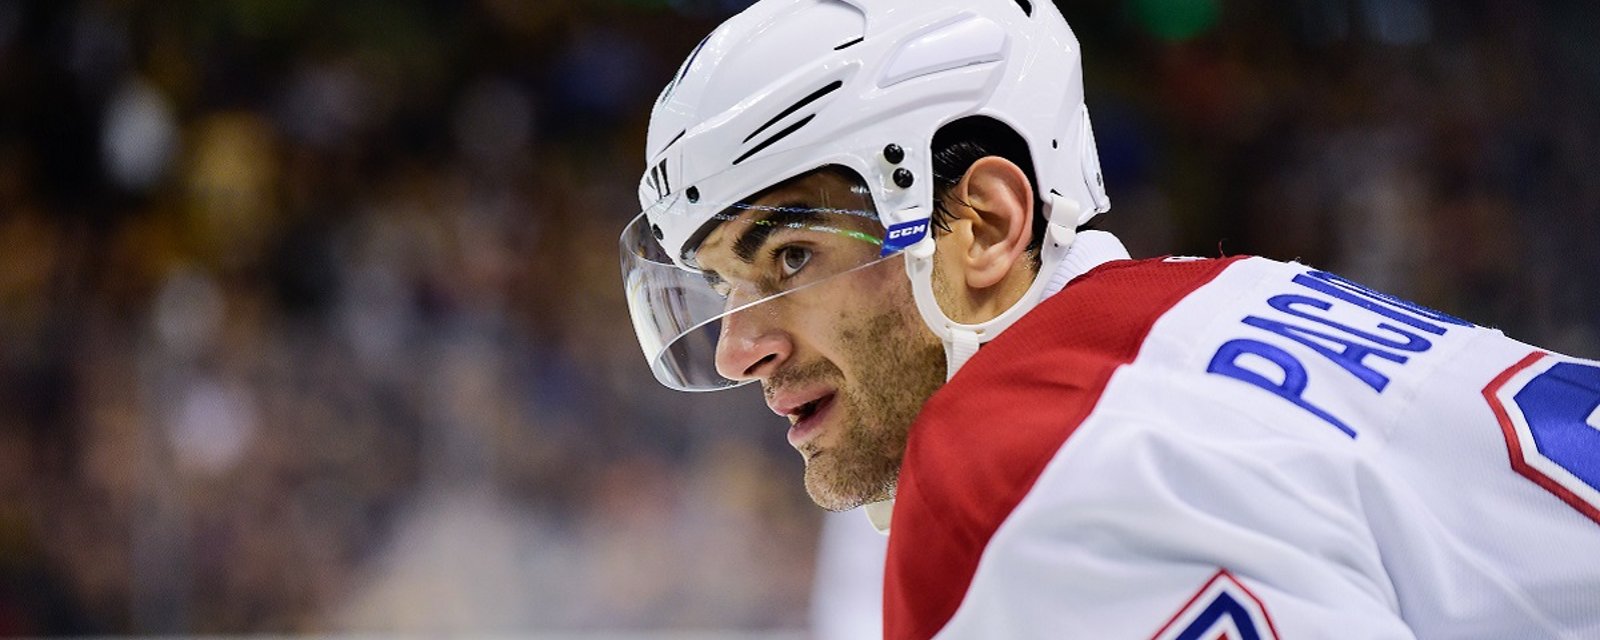 Breaking: NHL insider reveals the exact asking price for Max Pacioretty